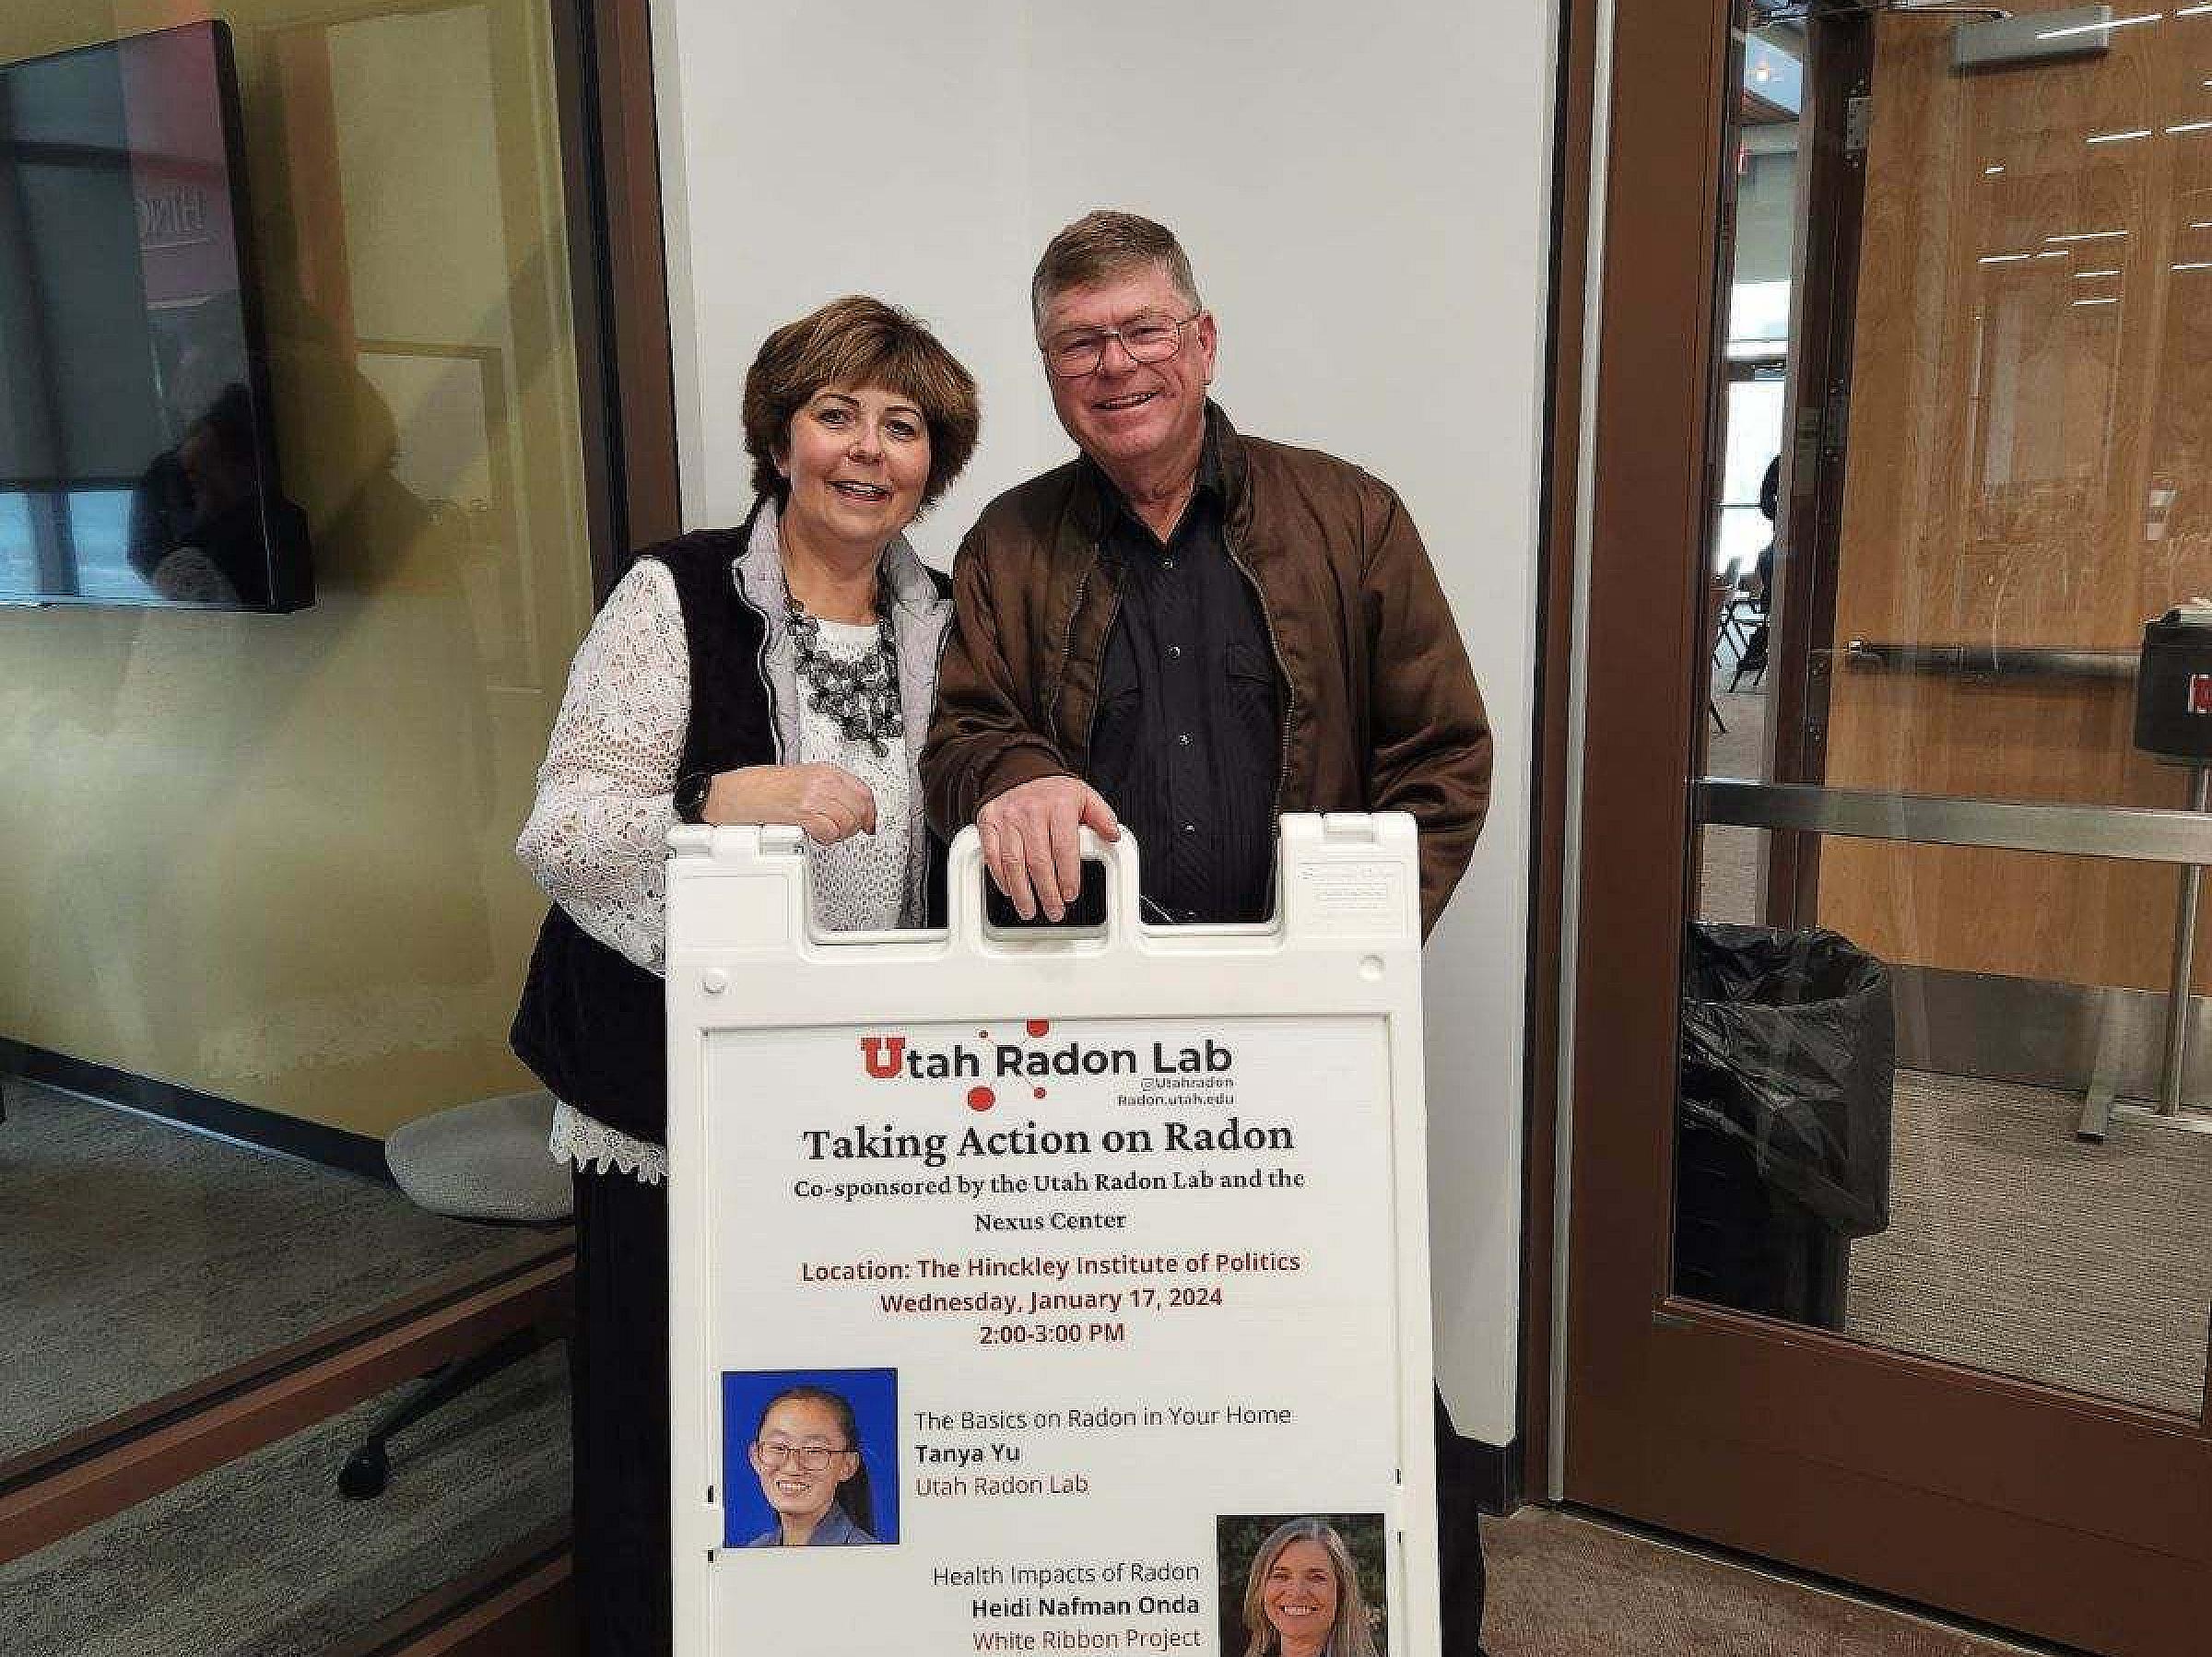 Kerri and her husband, Ron, attend a Taking Action on Radon event at the University of Utah (January, 2024).